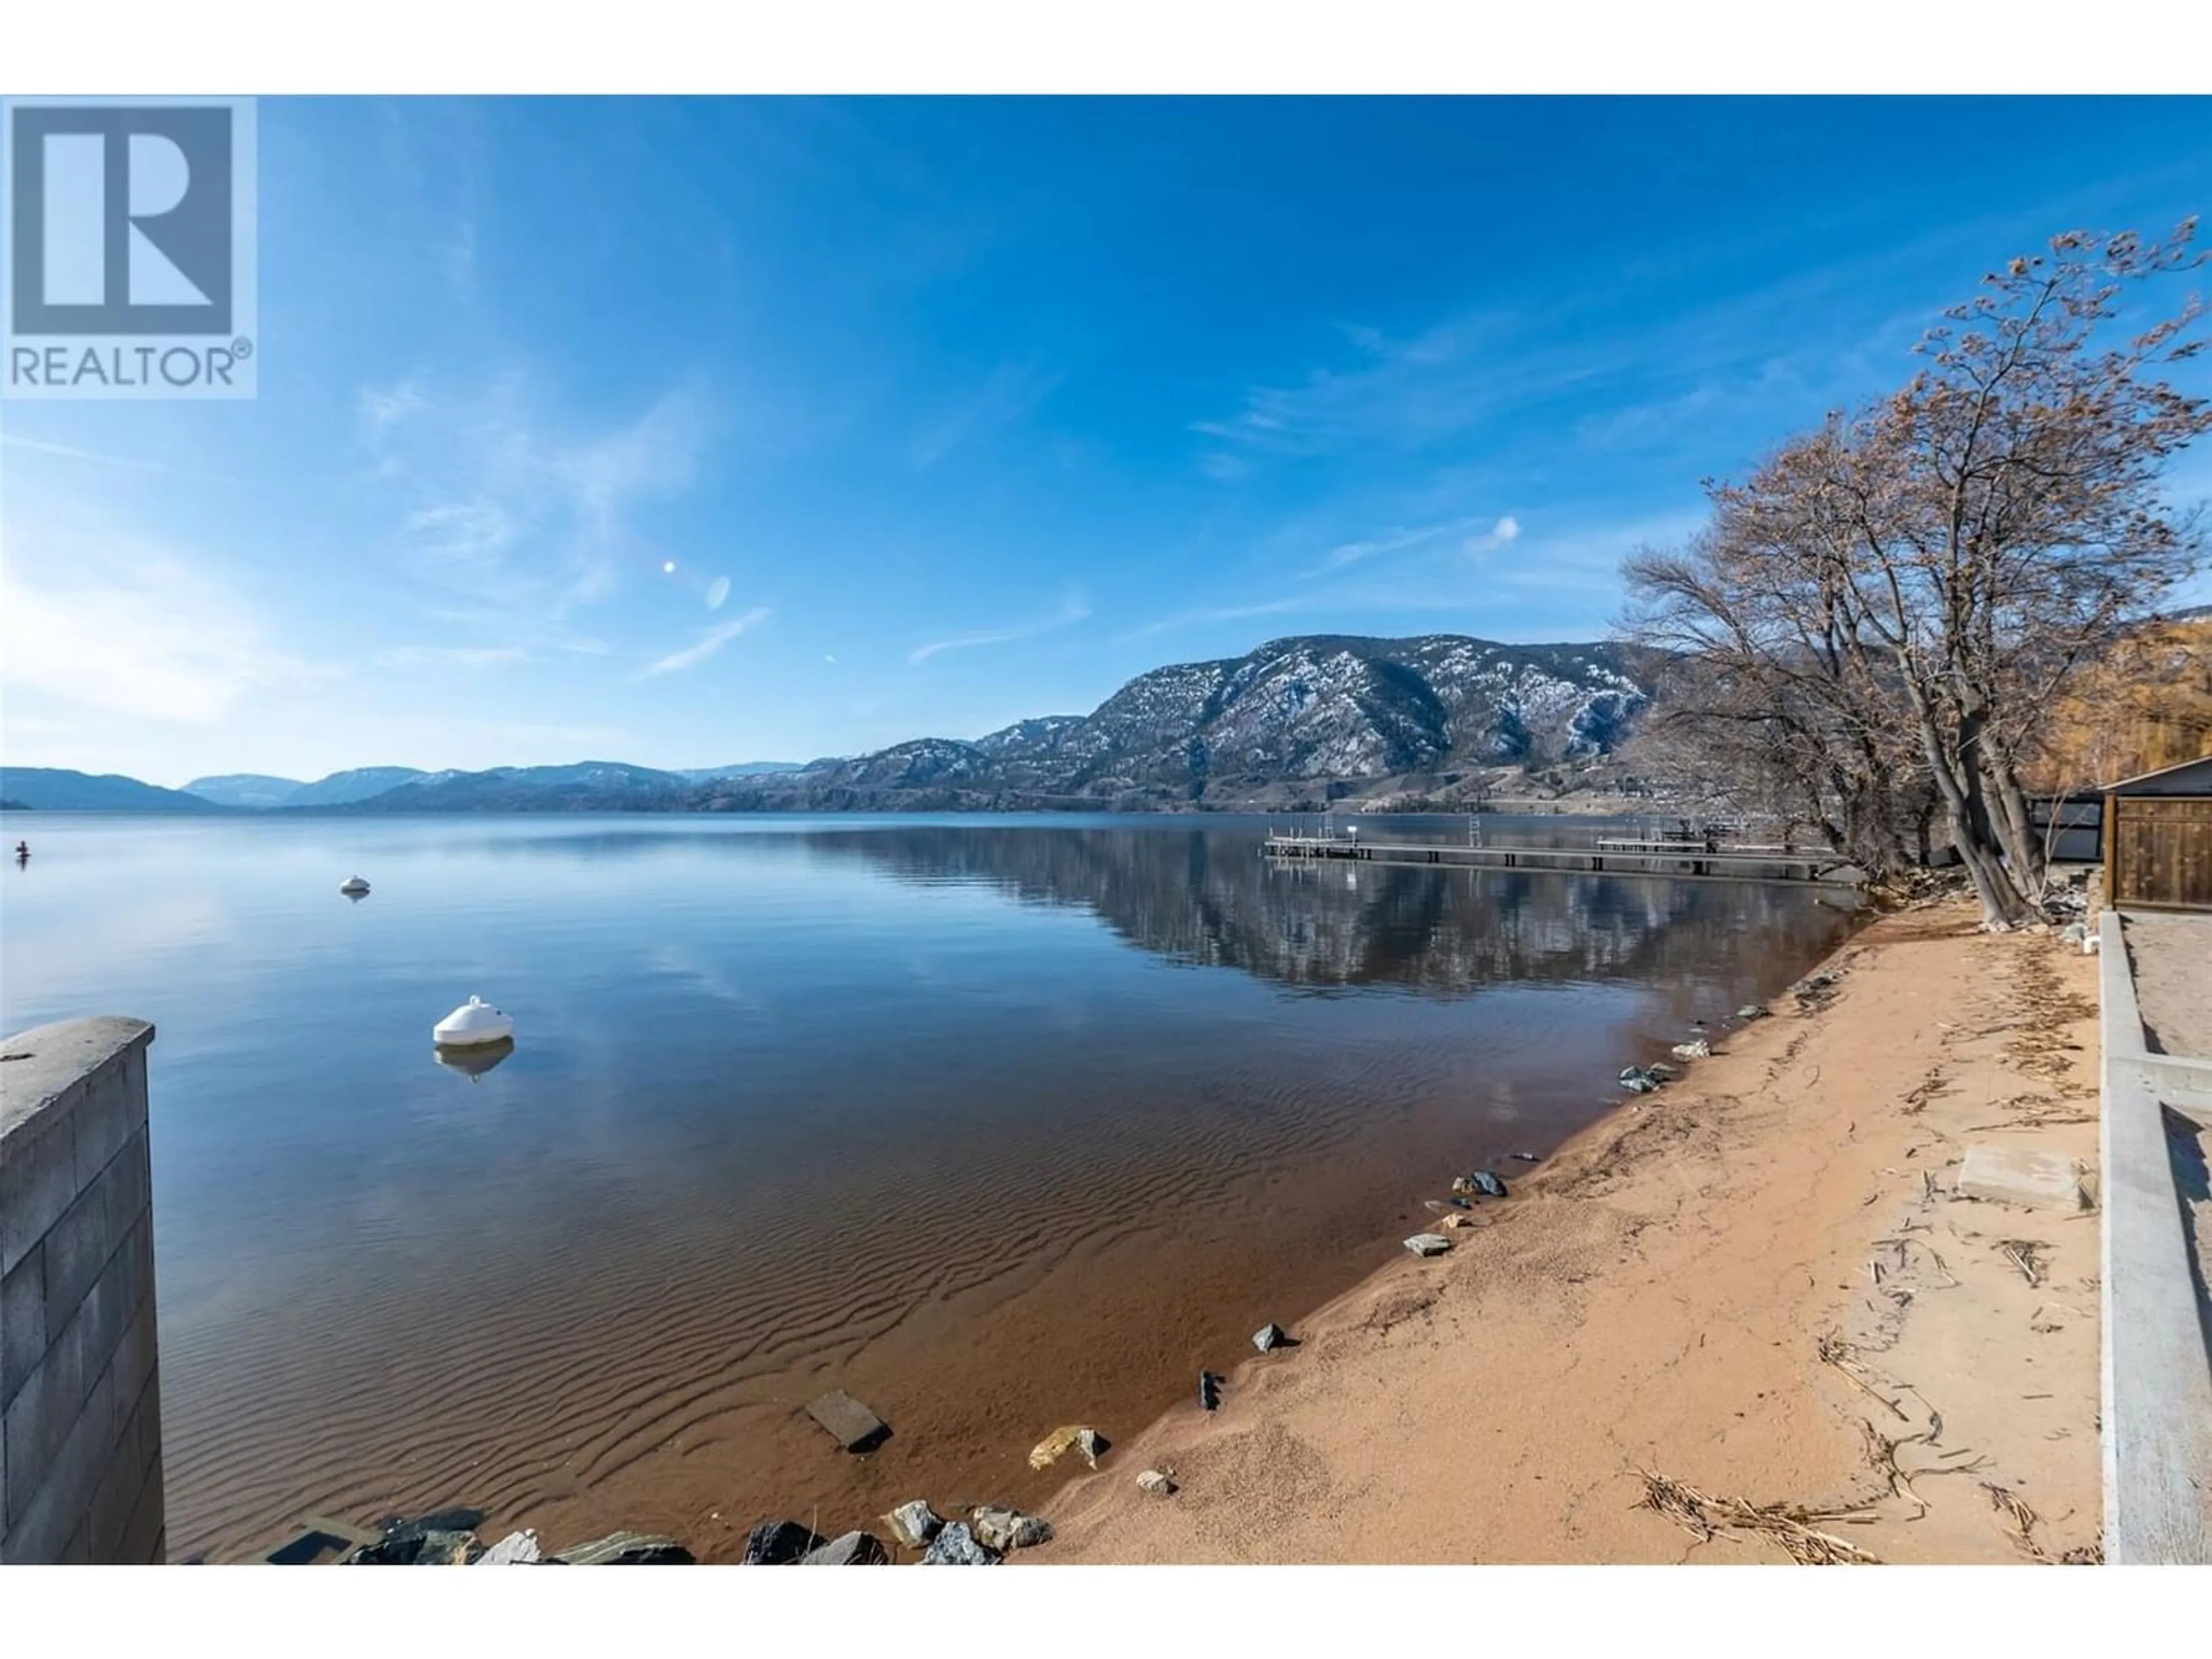 Lakeview for 270 South Beach Drive, Penticton British Columbia V2A3W3